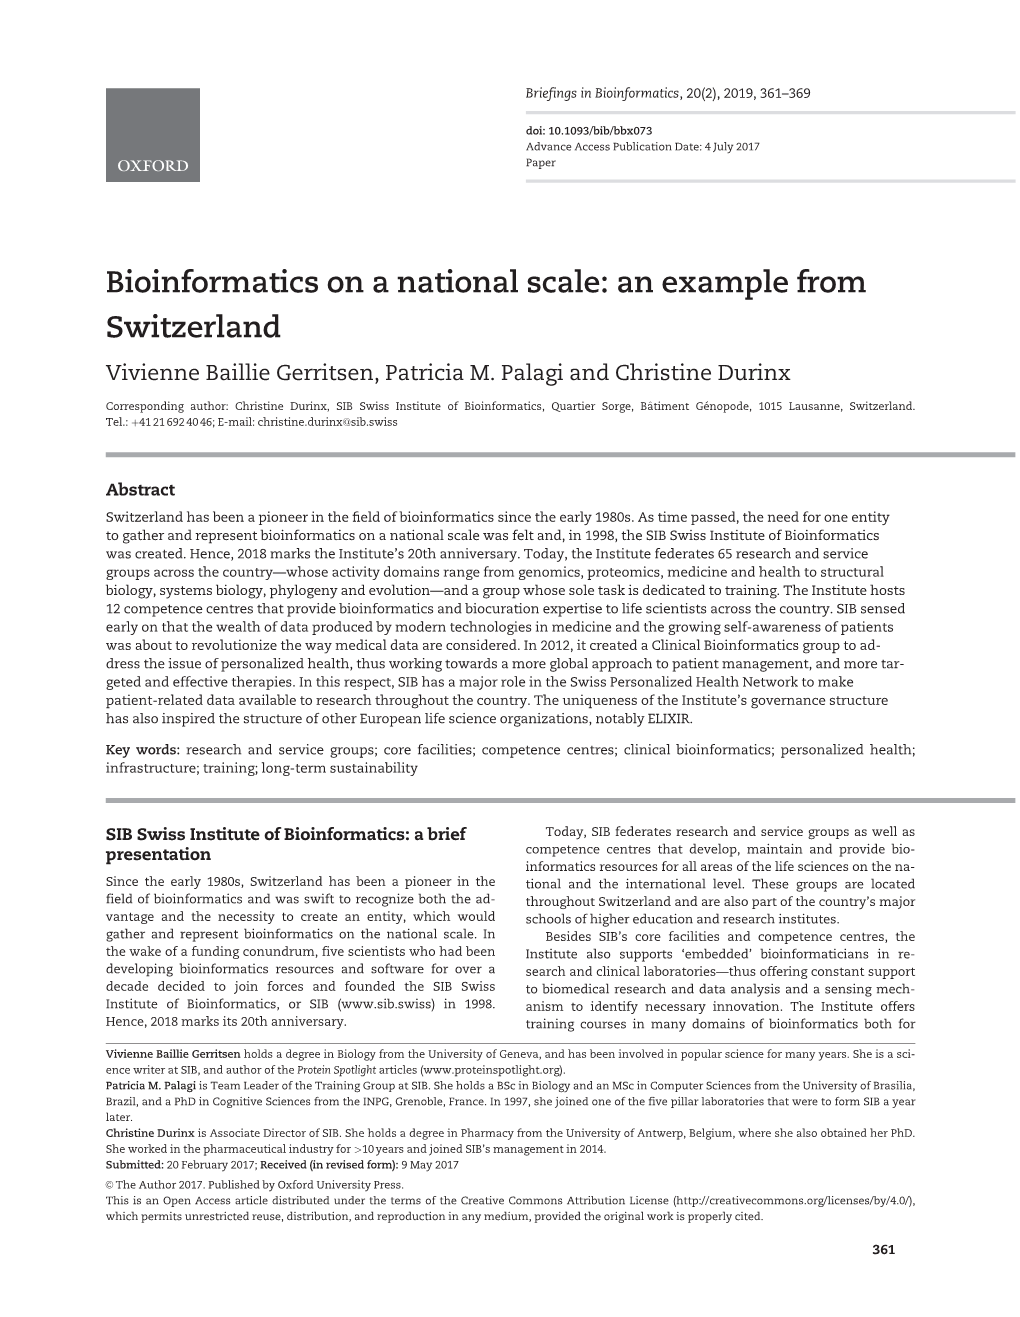 Bioinformatics on a National Scale: an Example from Switzerland Vivienne Baillie Gerritsen, Patricia M